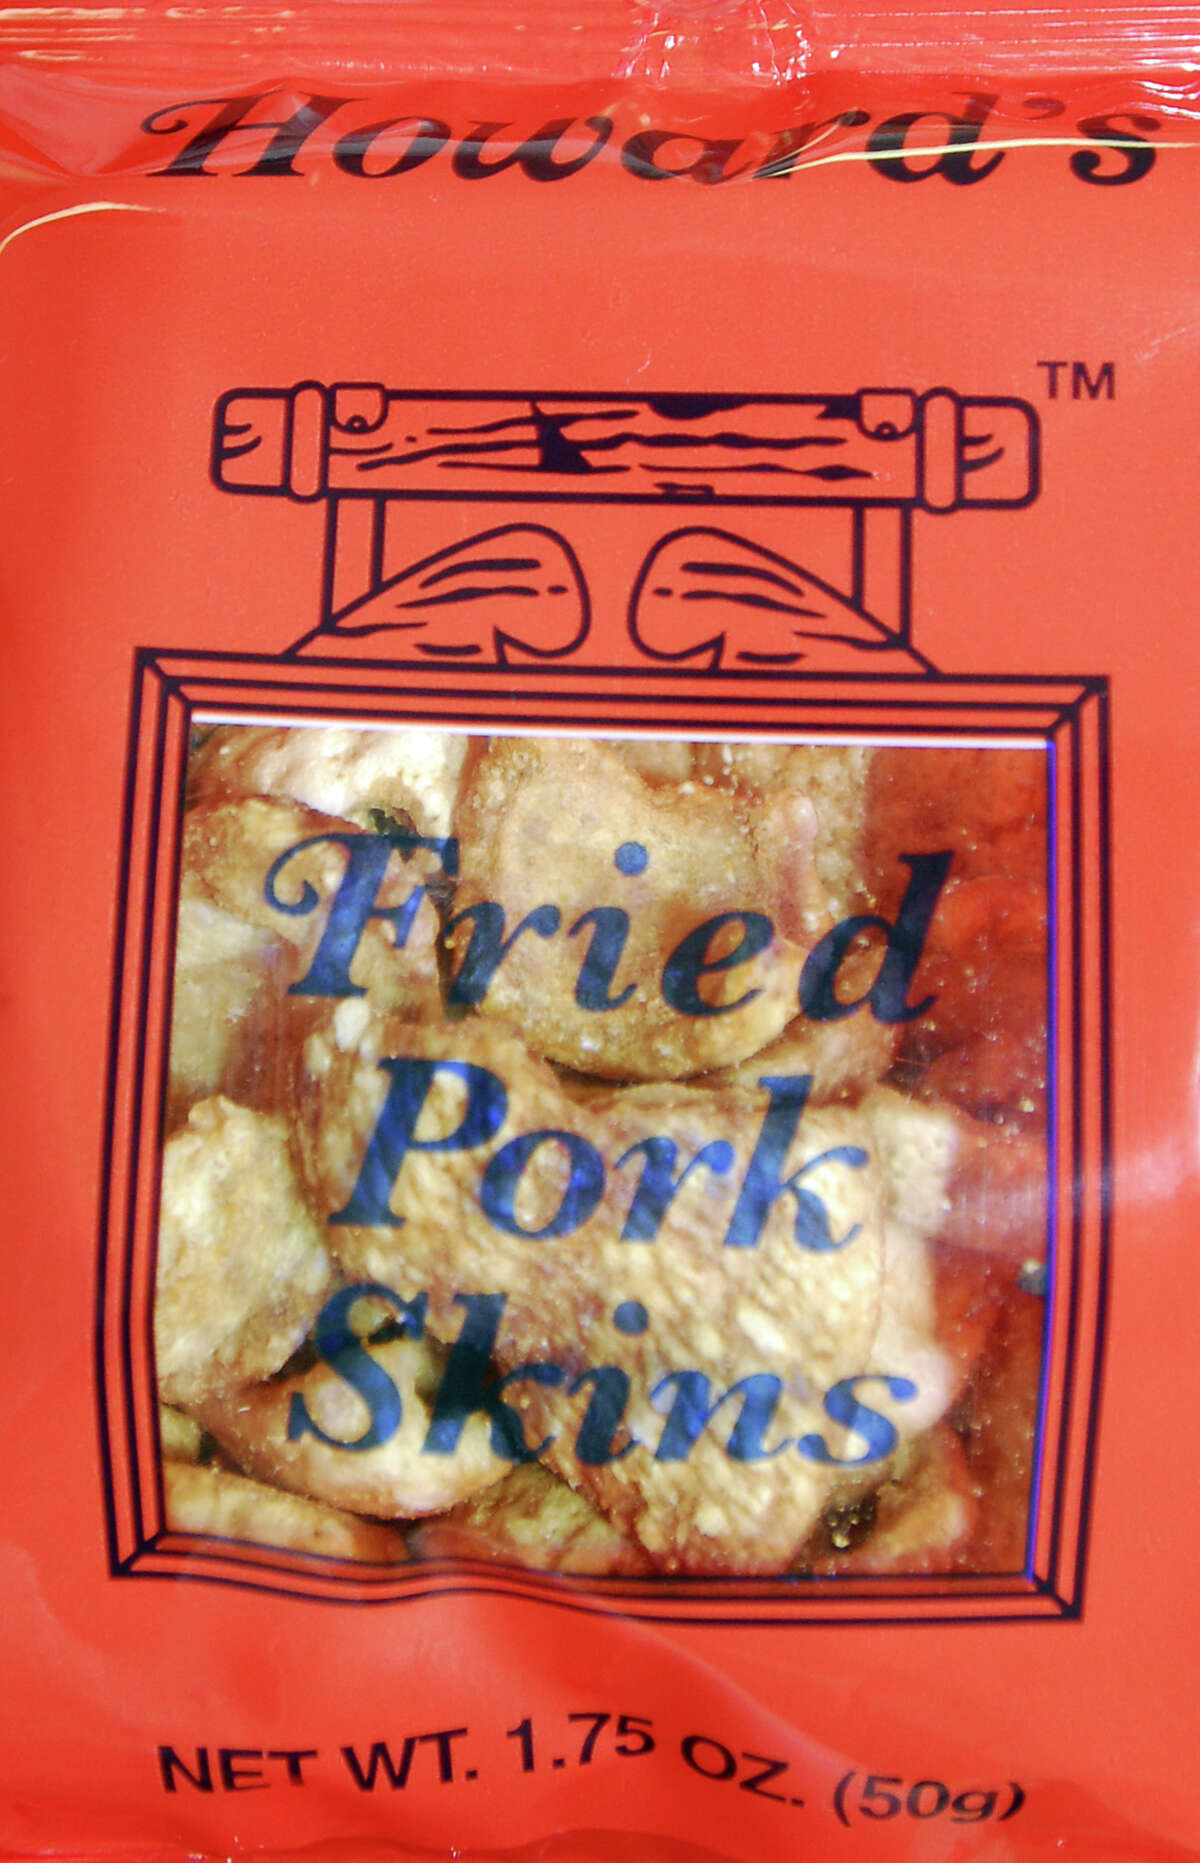 Photography by PETER HVIZDAK ph1199 #7290 Hamden, Connecticut - December 17, 2009: Howard's Fried Pork Skins made by The International Group, Inc. company in Hamden. Known for its' fried pork skins, especially Howard's Fried Pork Skins, the company makes ethnic snack foods and other food products as well as being a major ethnic food importer.